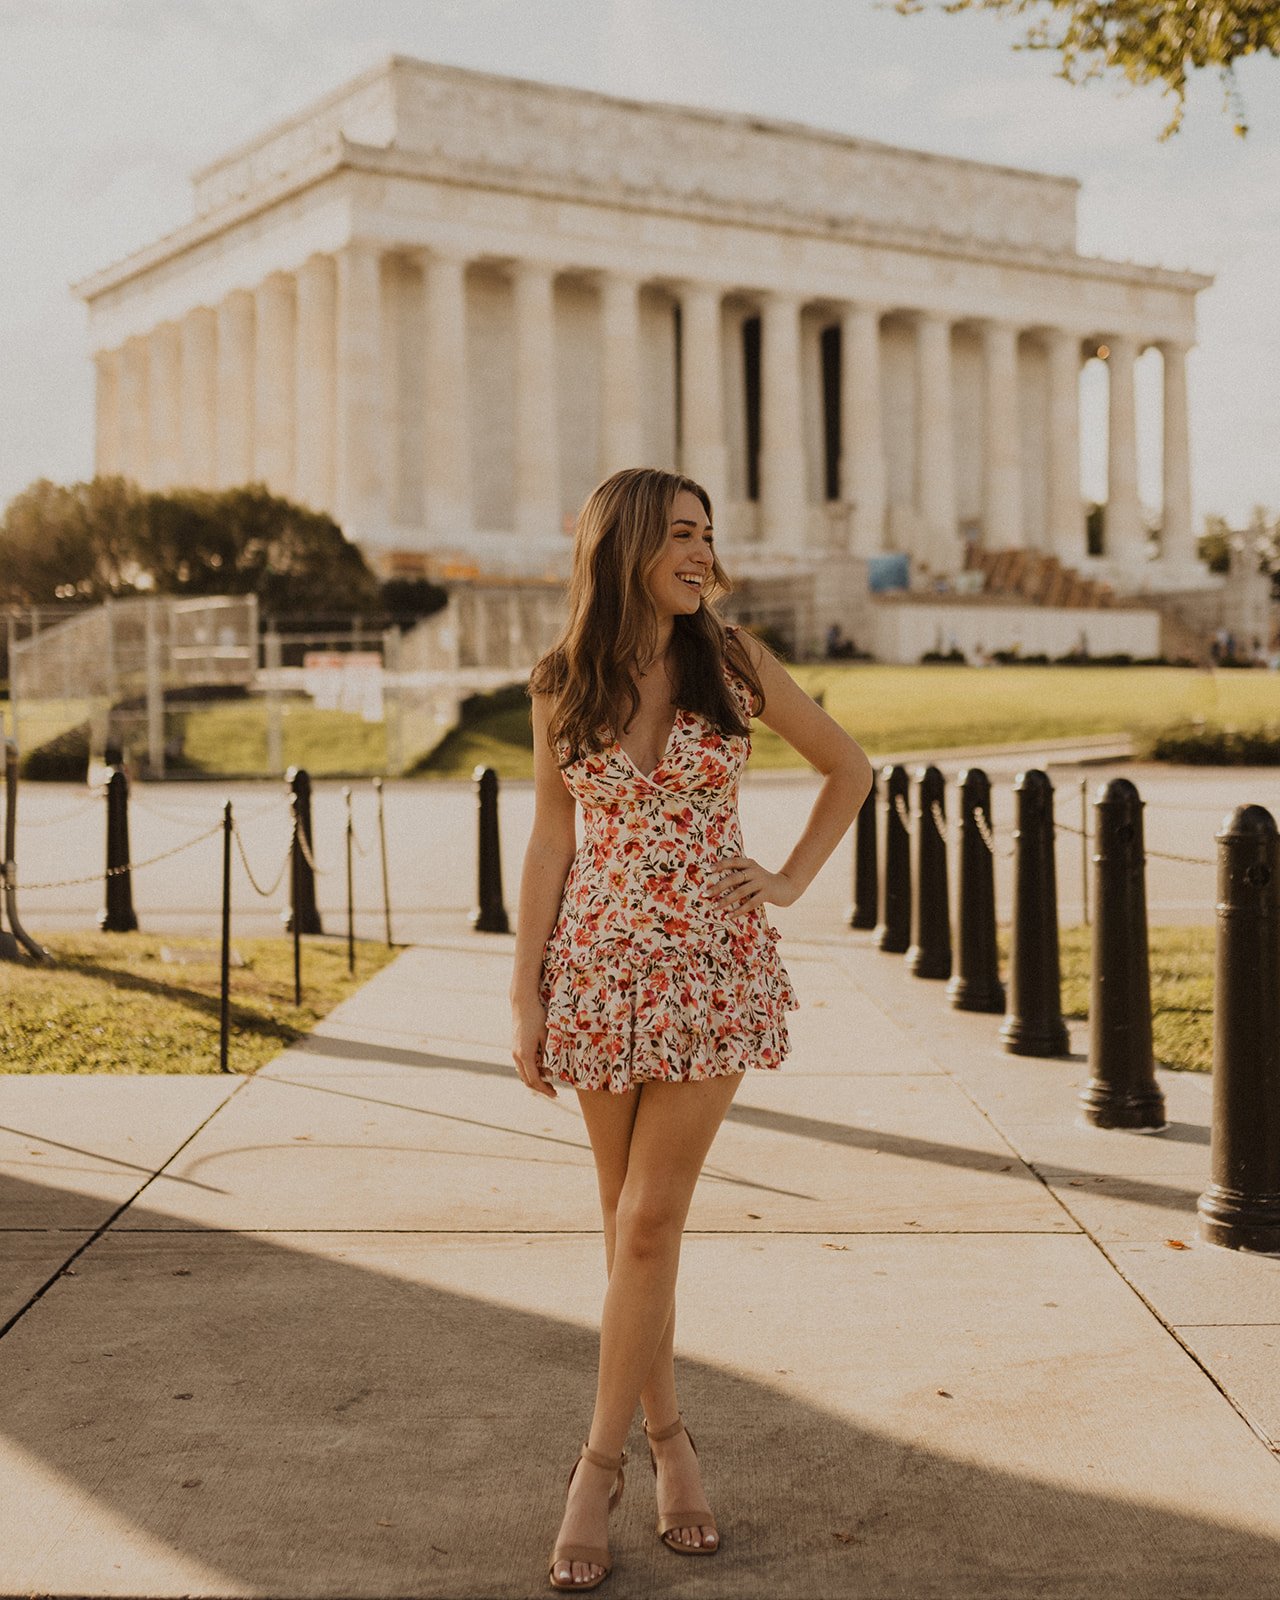 Senior Portraits at The National Mall in Washington, D.C.-13